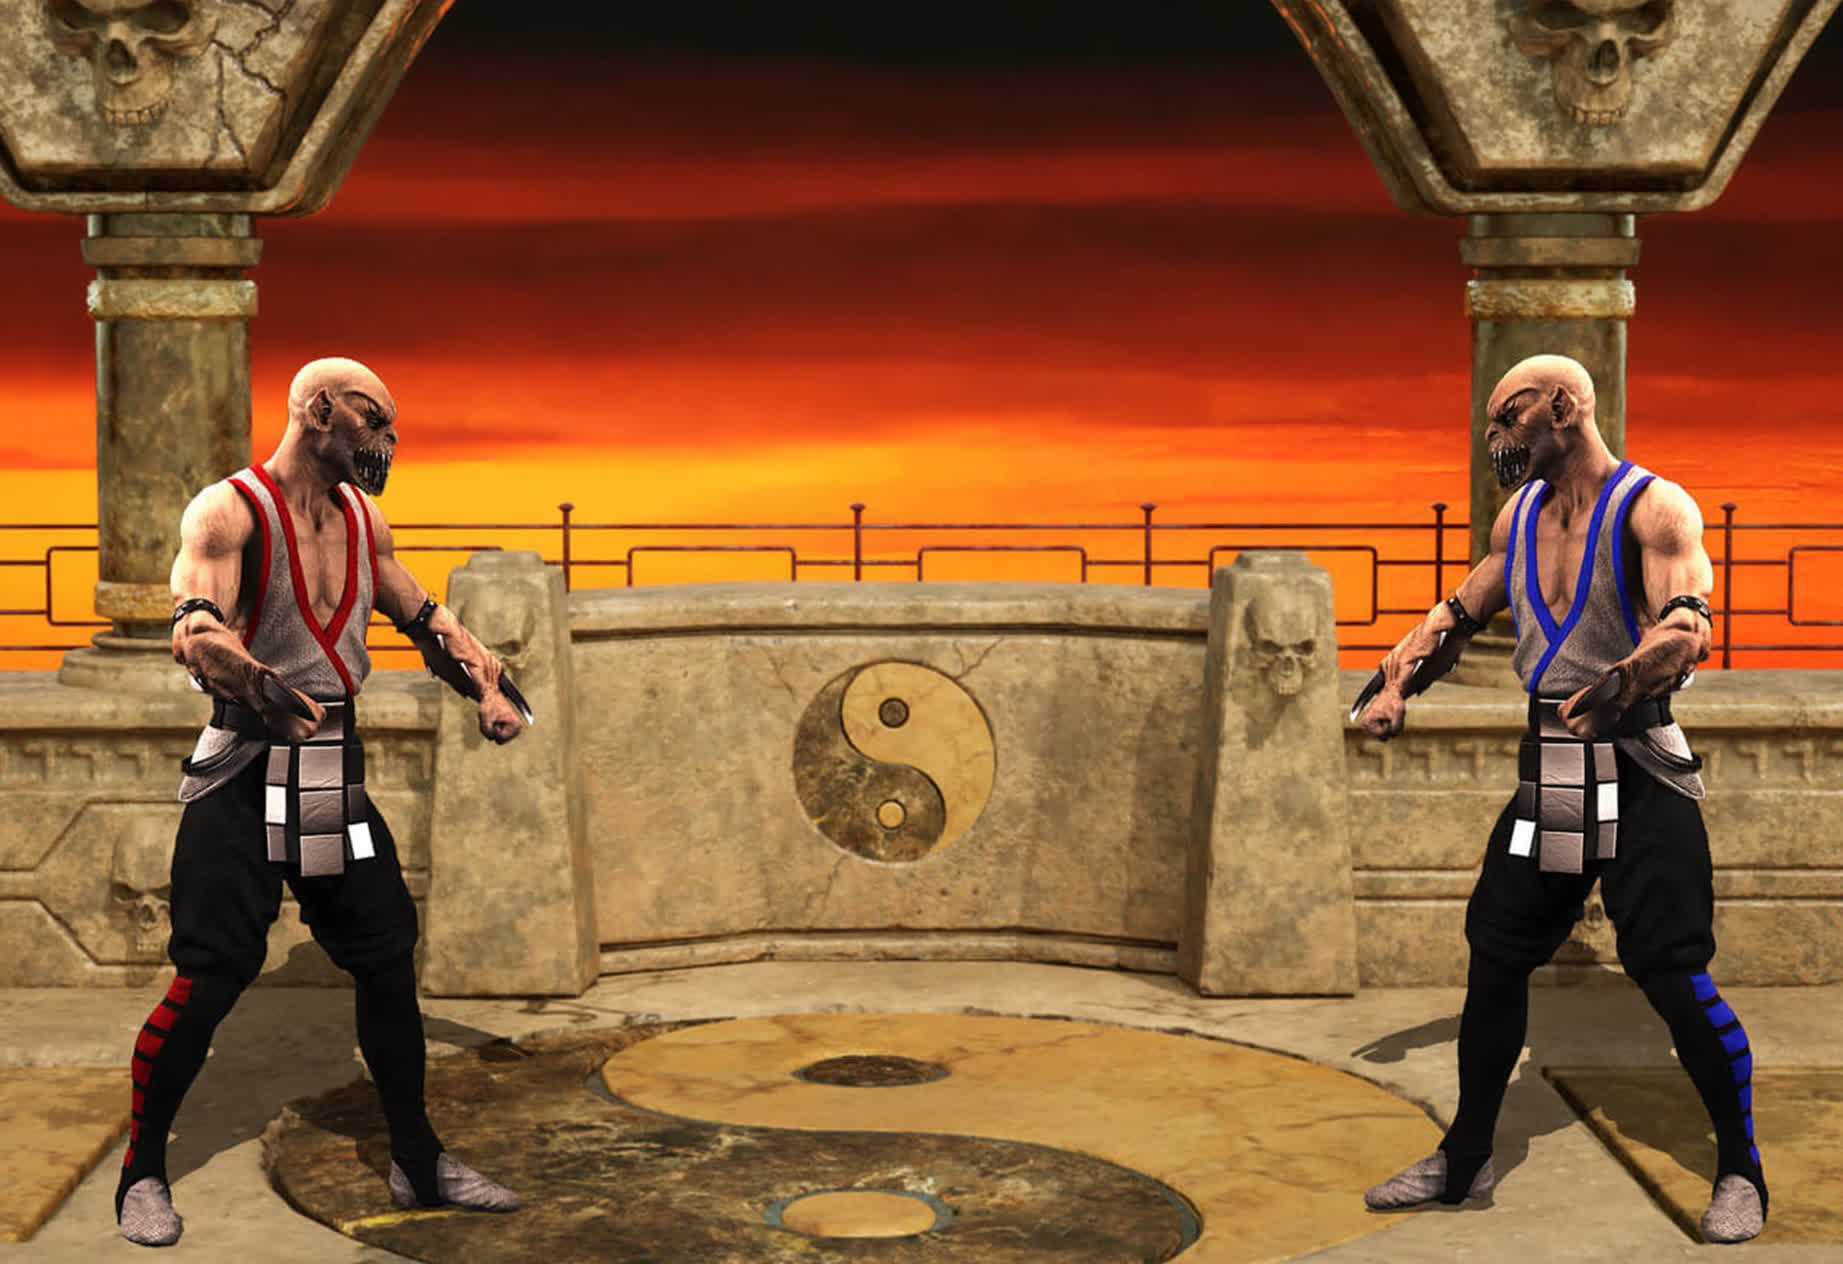 Fan-made Mortal Kombat+ fixes bugs and adds new features to the original arcade trilogy